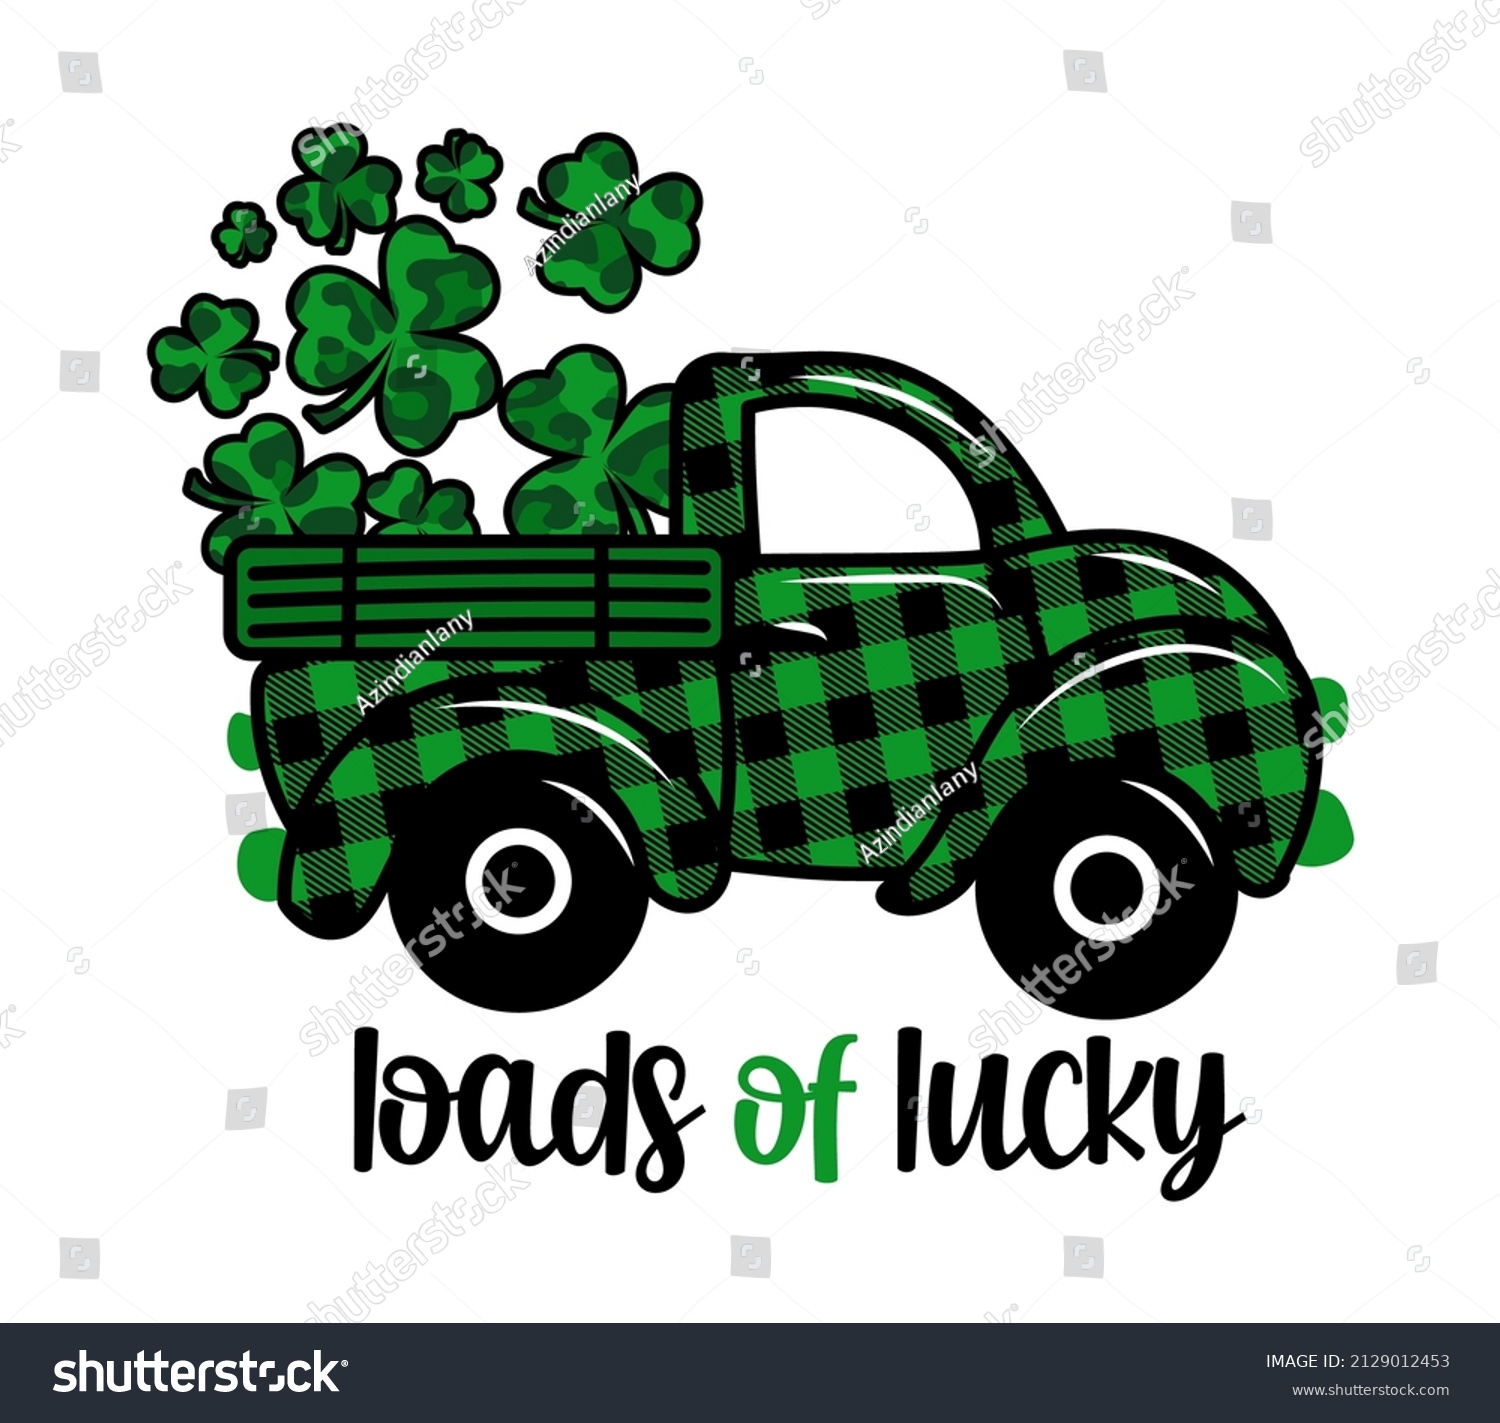 SVG of Loads of Lucky - Calligraphy phrase. Lettering for Lucky day greeting cards, invitations. Good for t-shirt, mug, gift, printing press. Buffalo plaid pickup carry  leopard Shamrocks svg